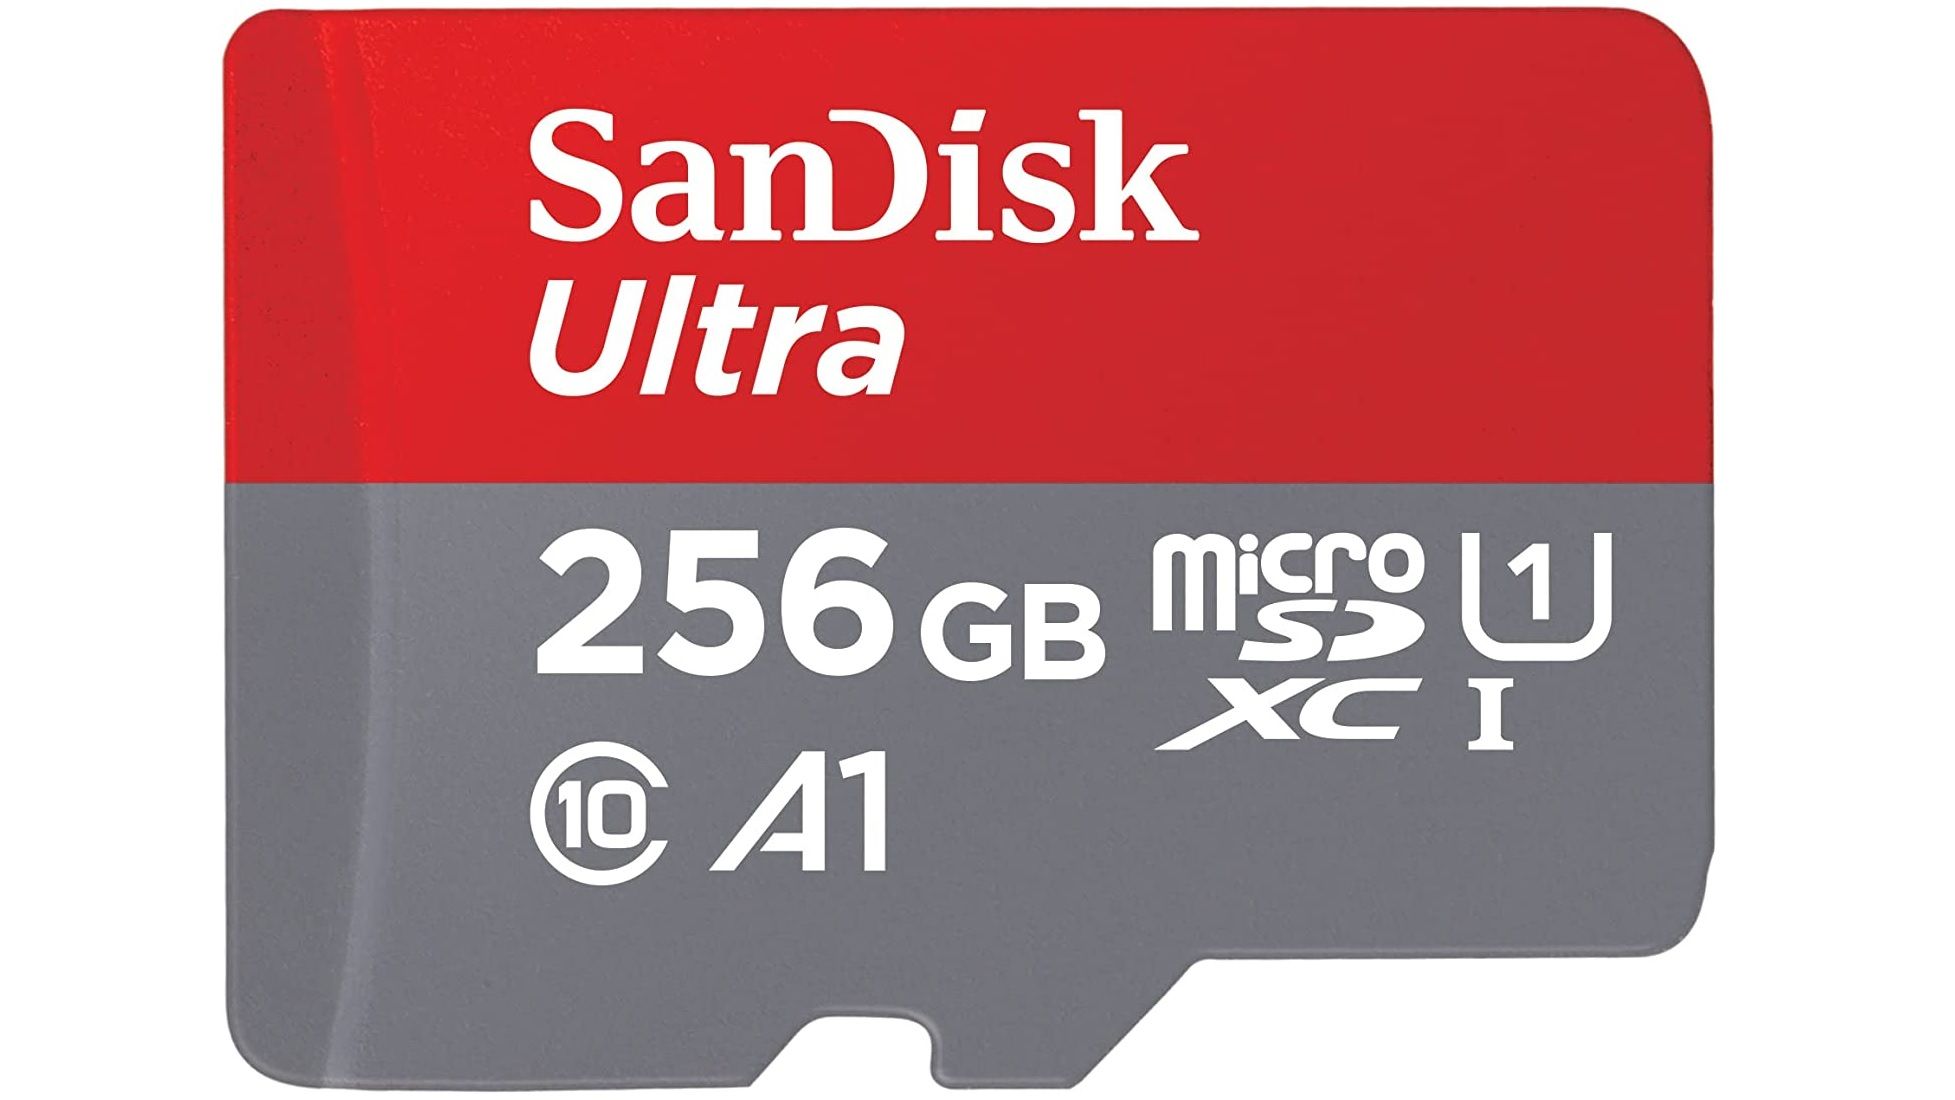 close up view of the sandisk ultra microsd card